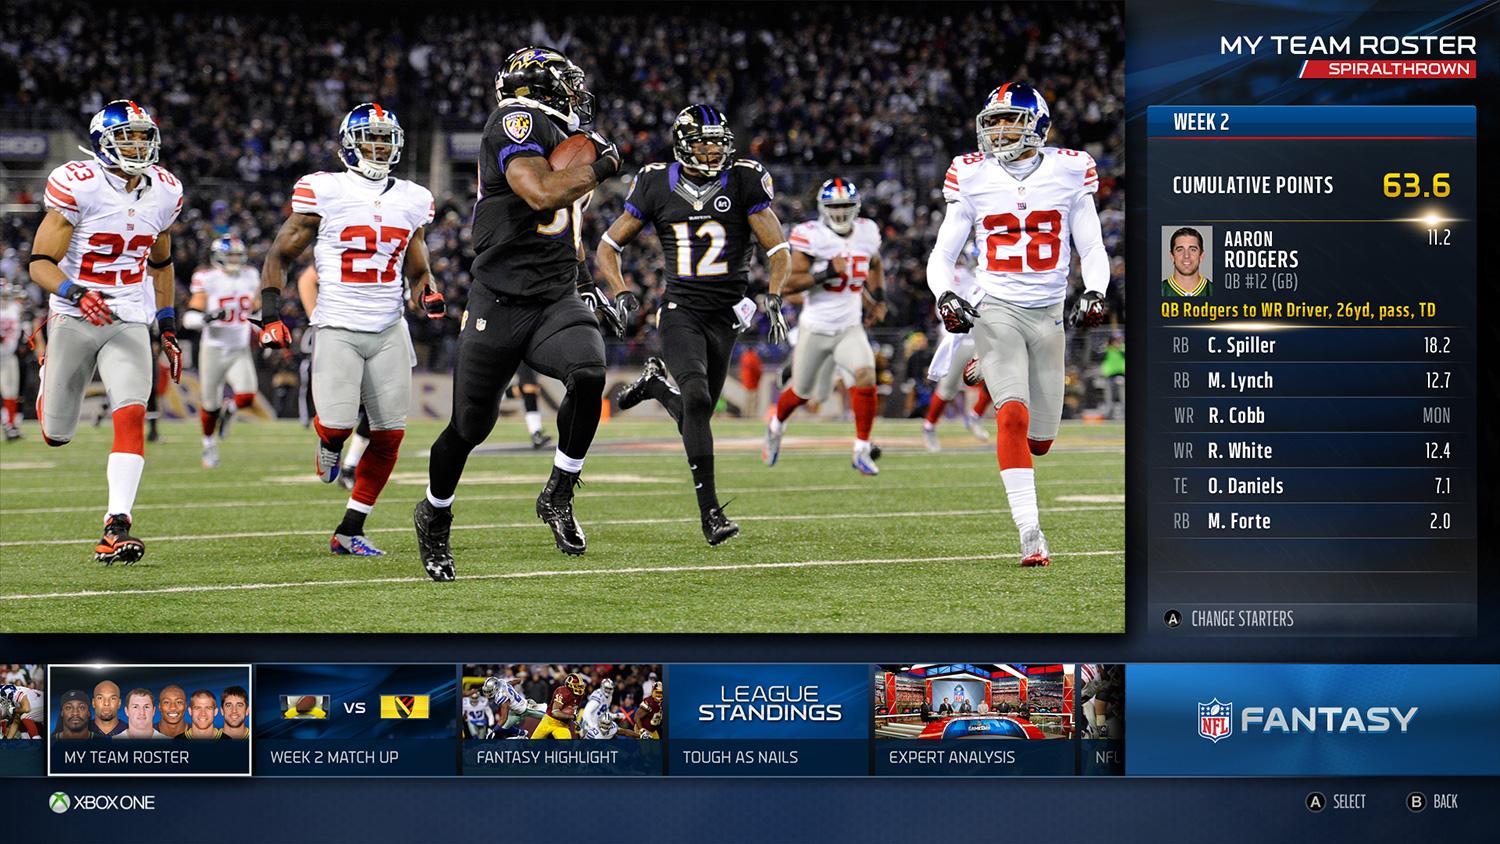 Xbox One rewards cord keepers with live NFL games